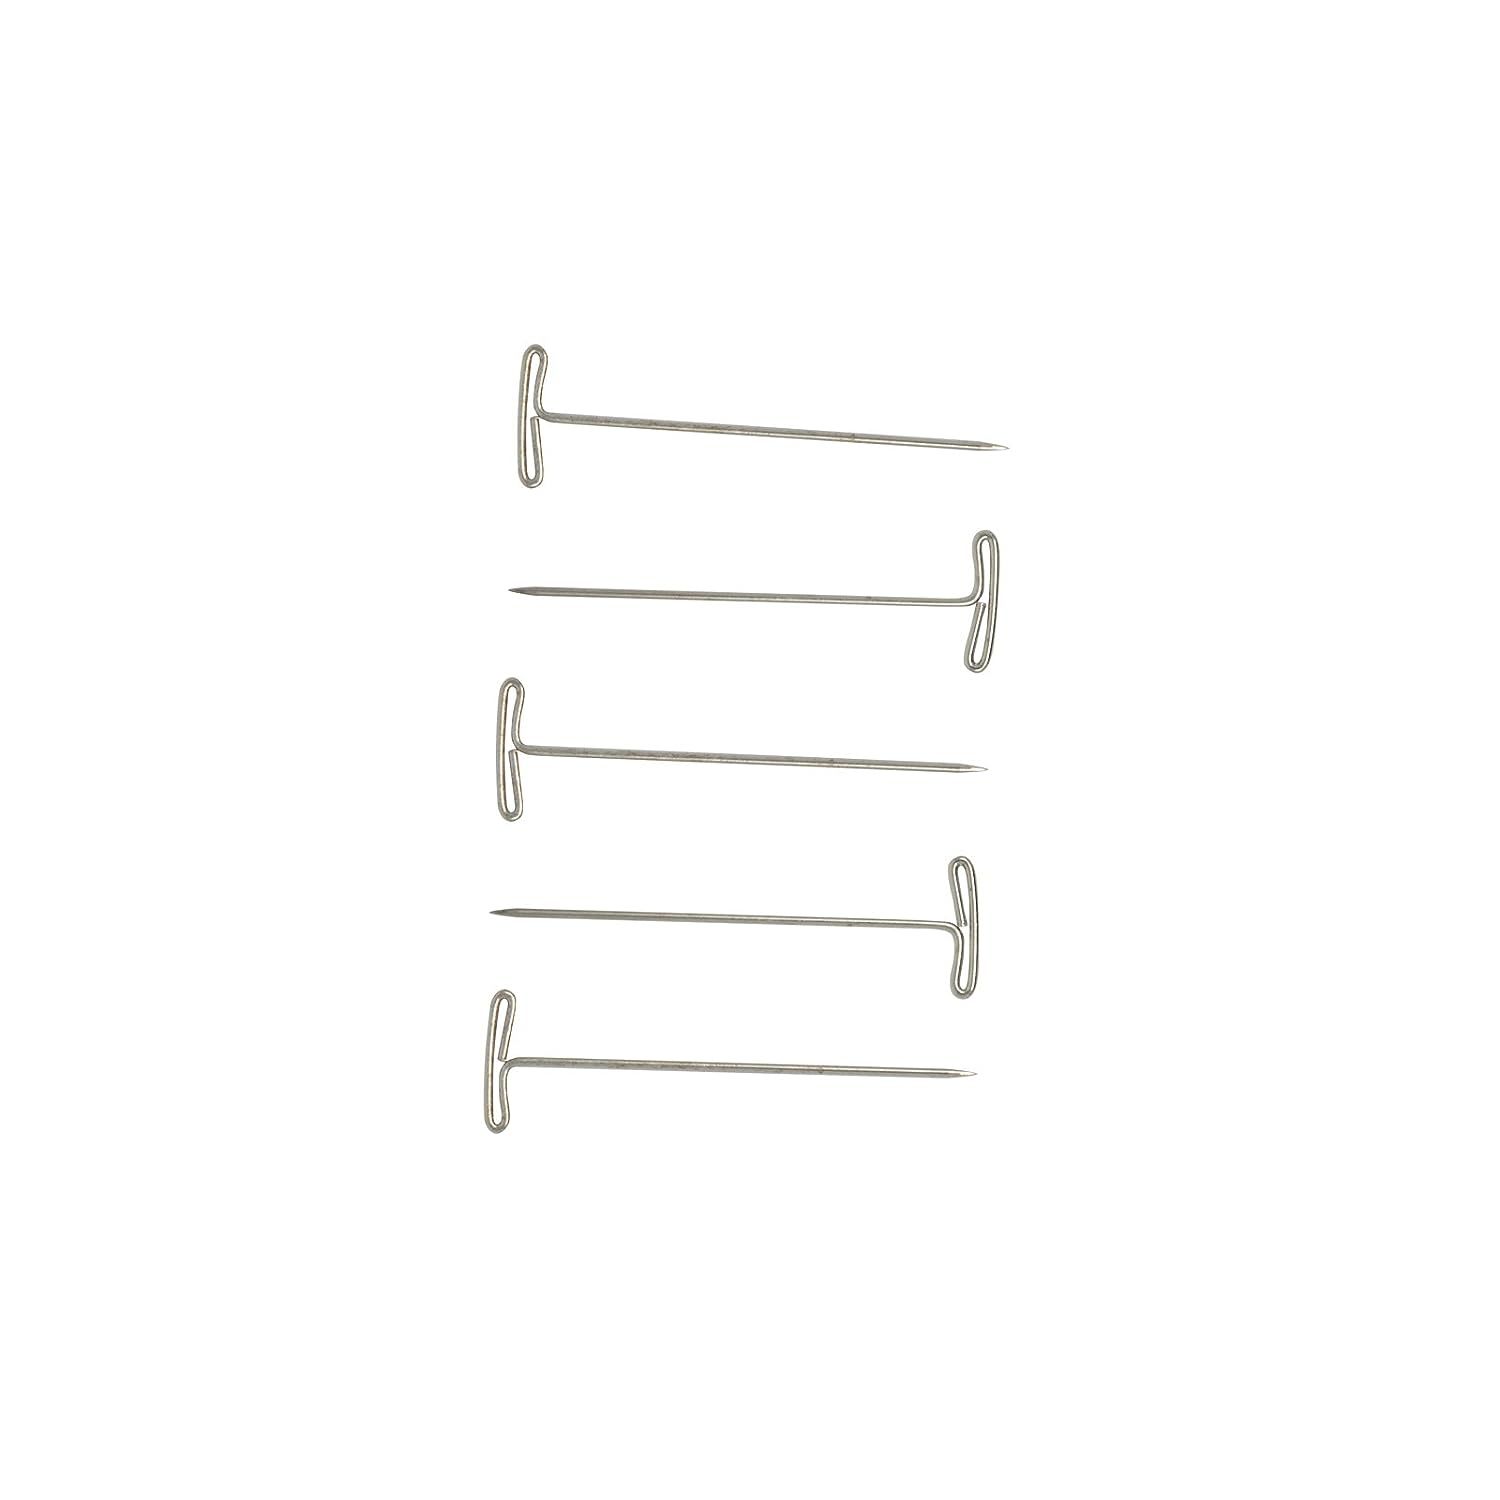 50pcs T Pins Stainless Steel T-Pins 1 Inch Straight T-Pins, Silver